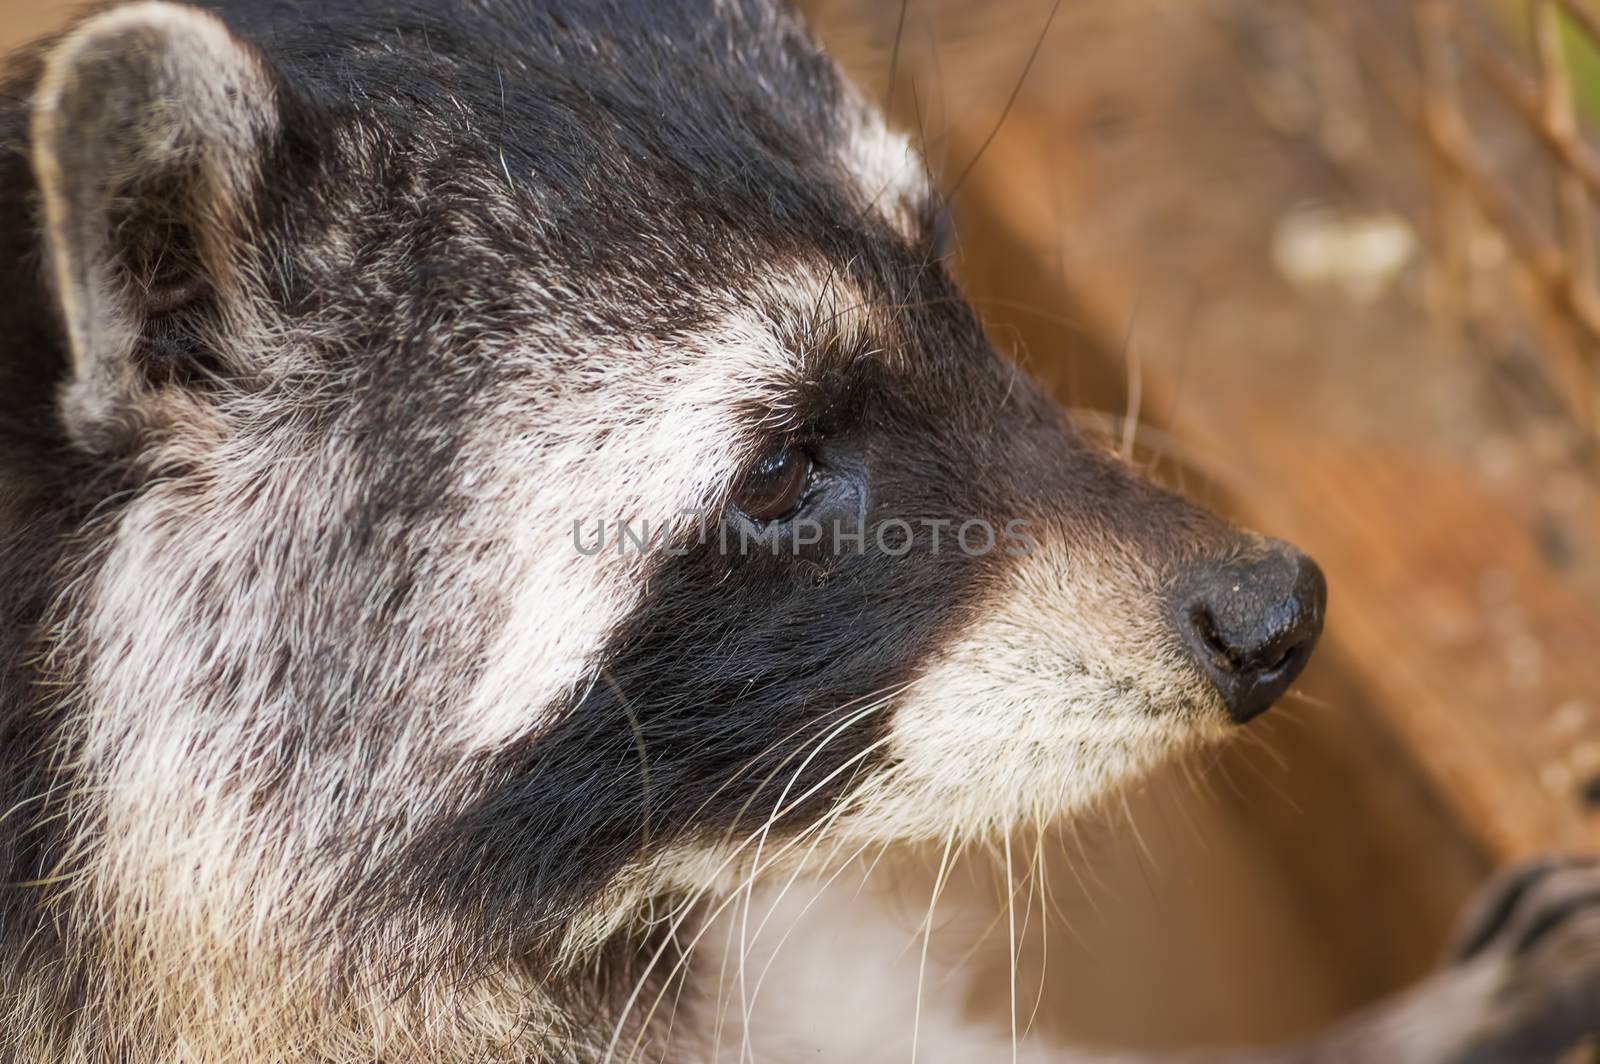 raccoon Procyon lotor , also known as the North American raccoon close up. Human like expression on the animal face